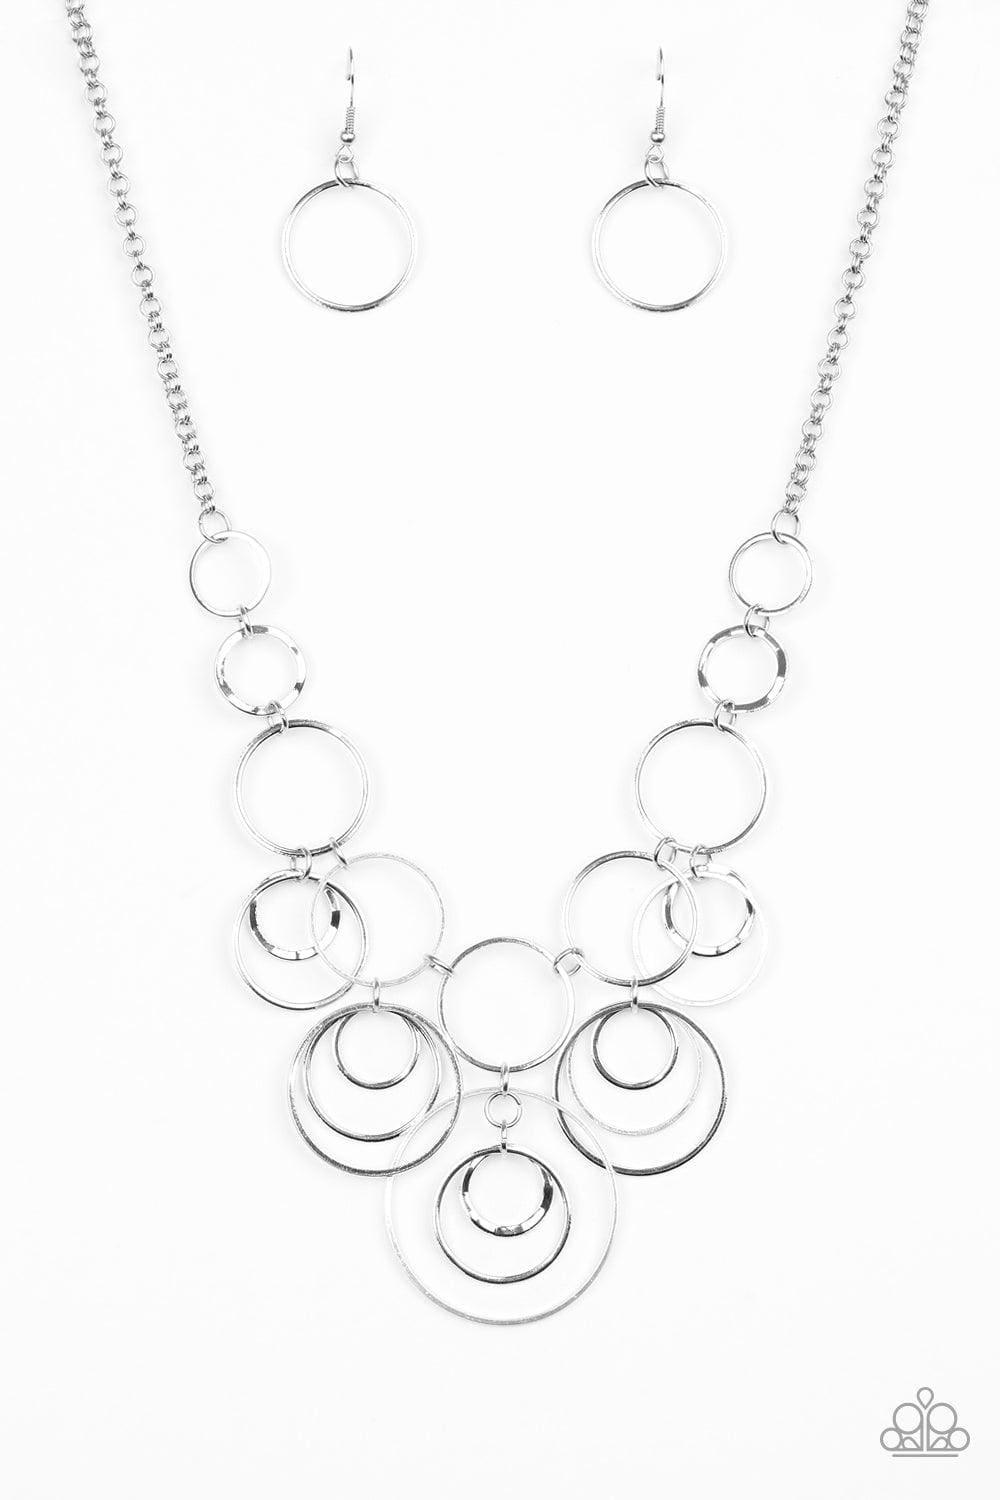 Paparazzi Accessories - Break The Cycle - Silver Necklace - Bling by JessieK